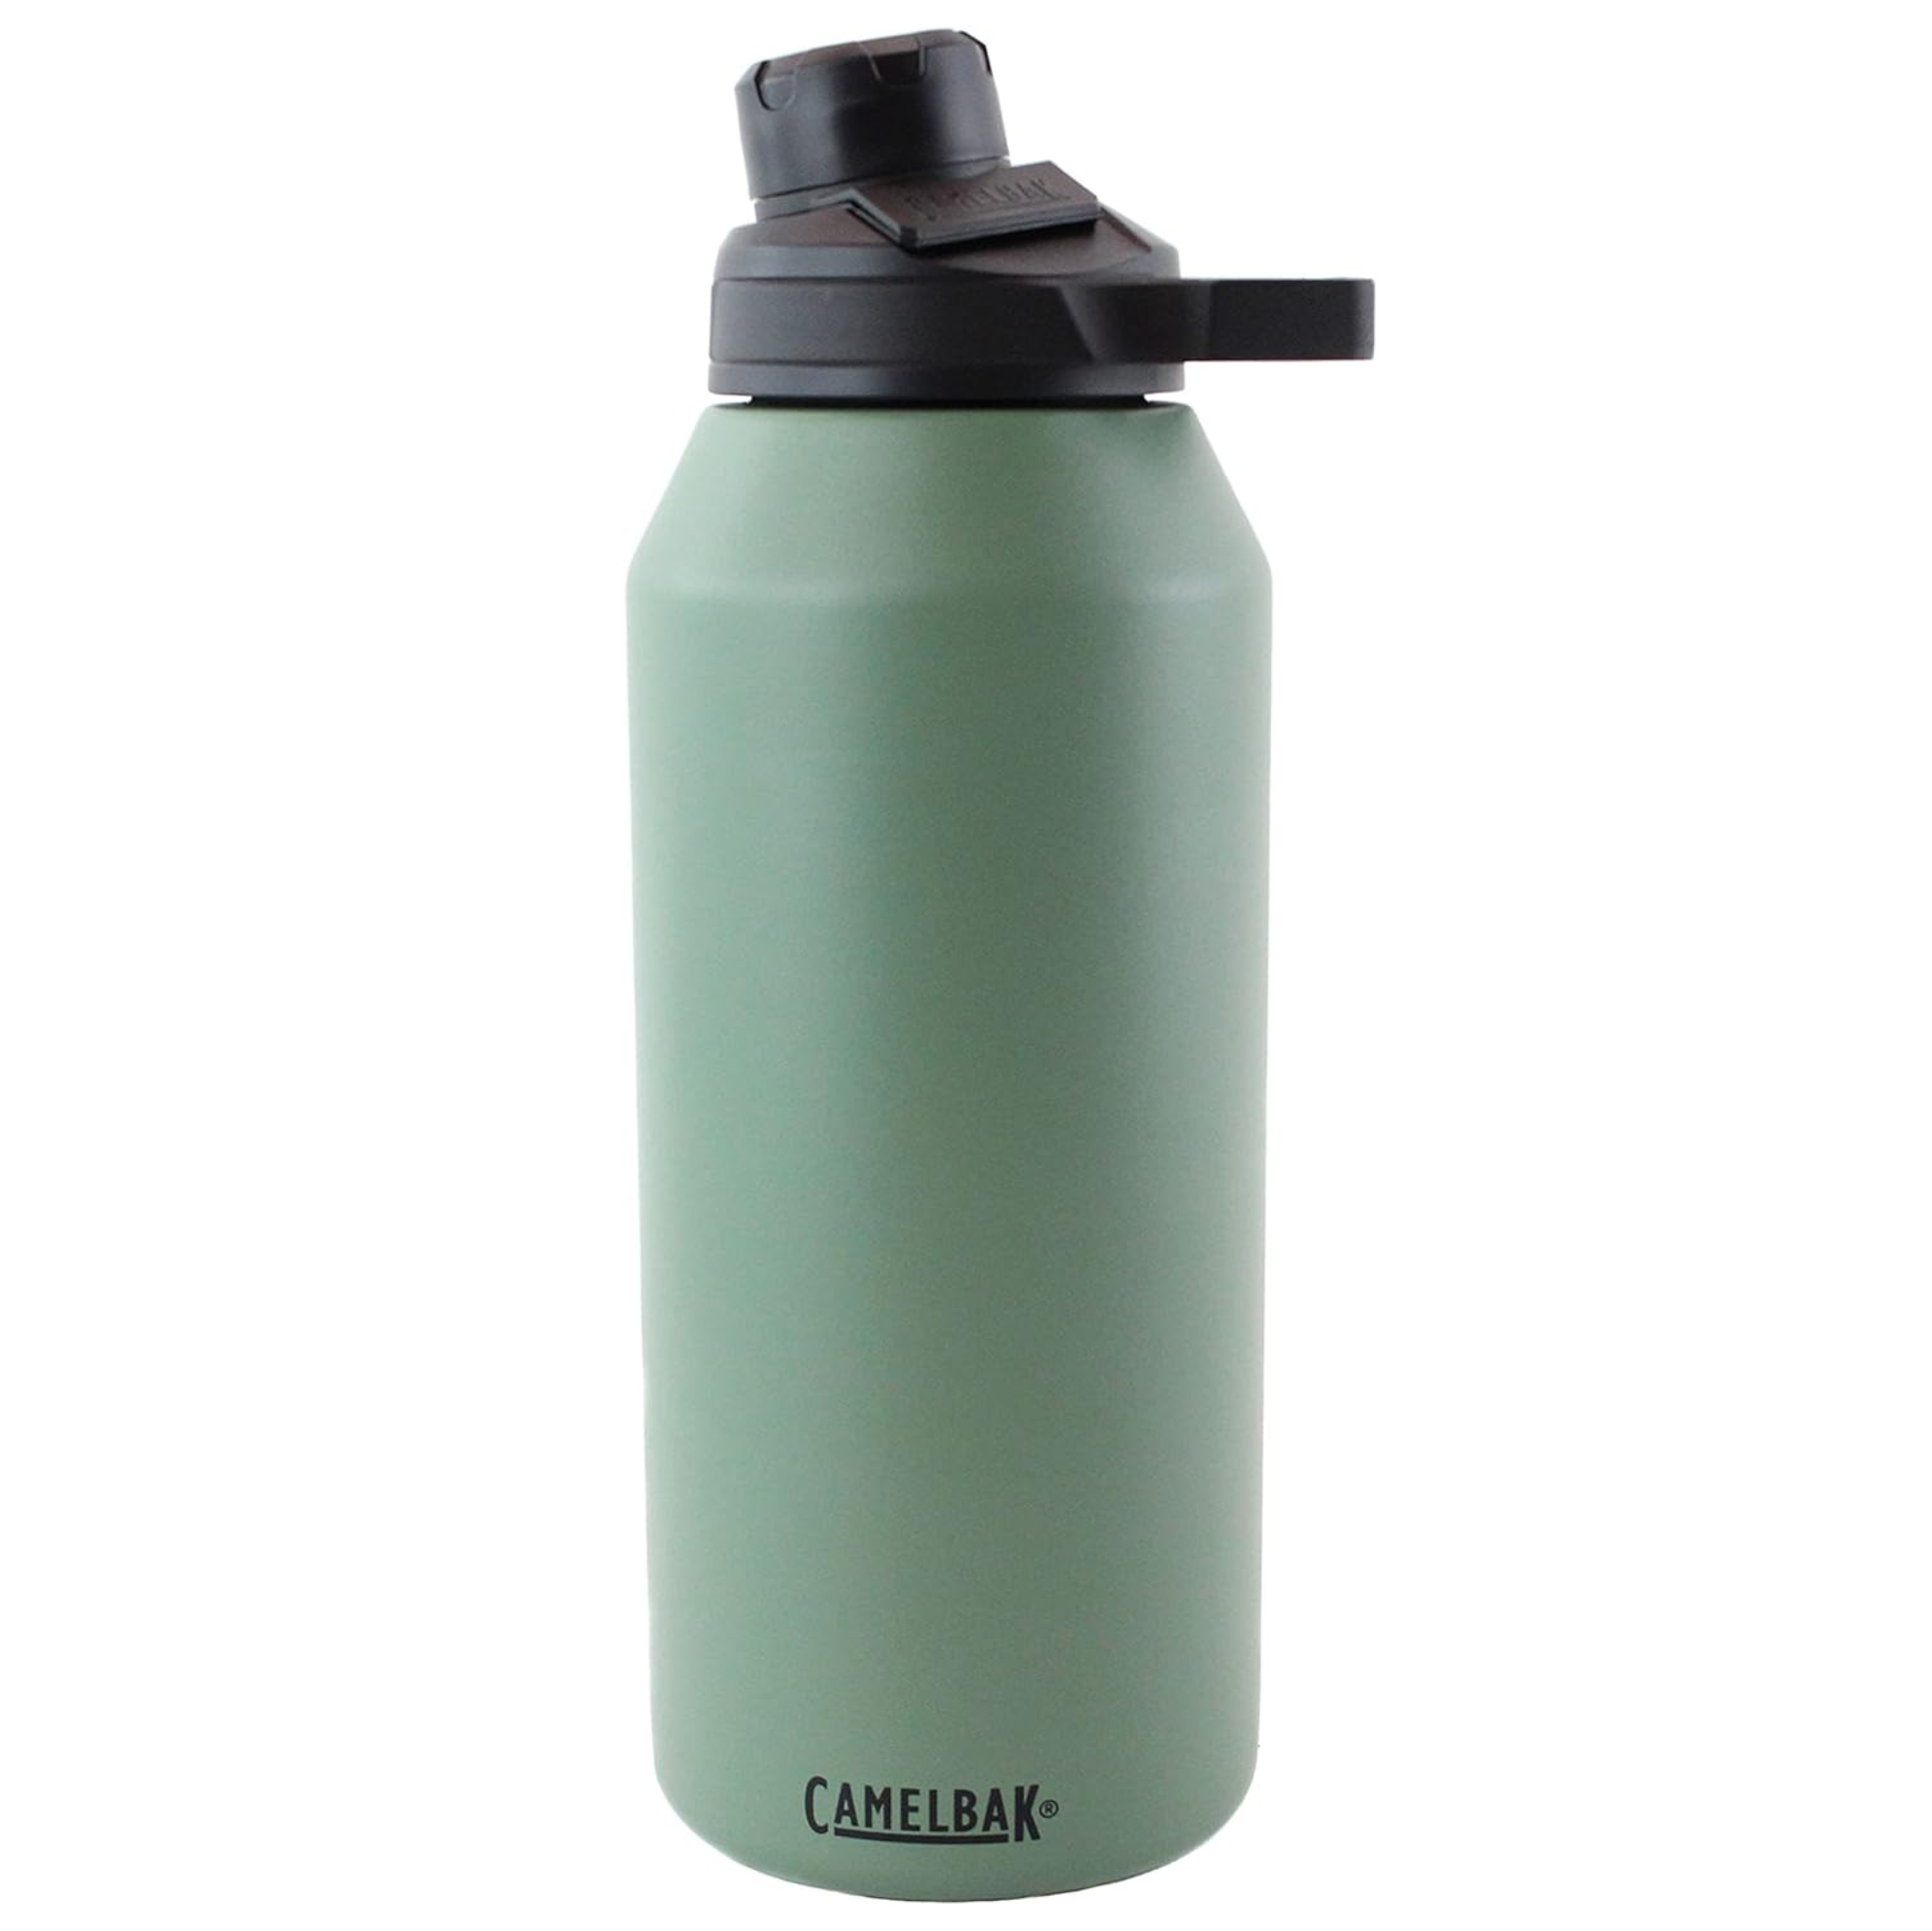 CAMELBAK VACUUM INSULATED Stainless Steel CHUTE MAG Water Bottle 1.2L